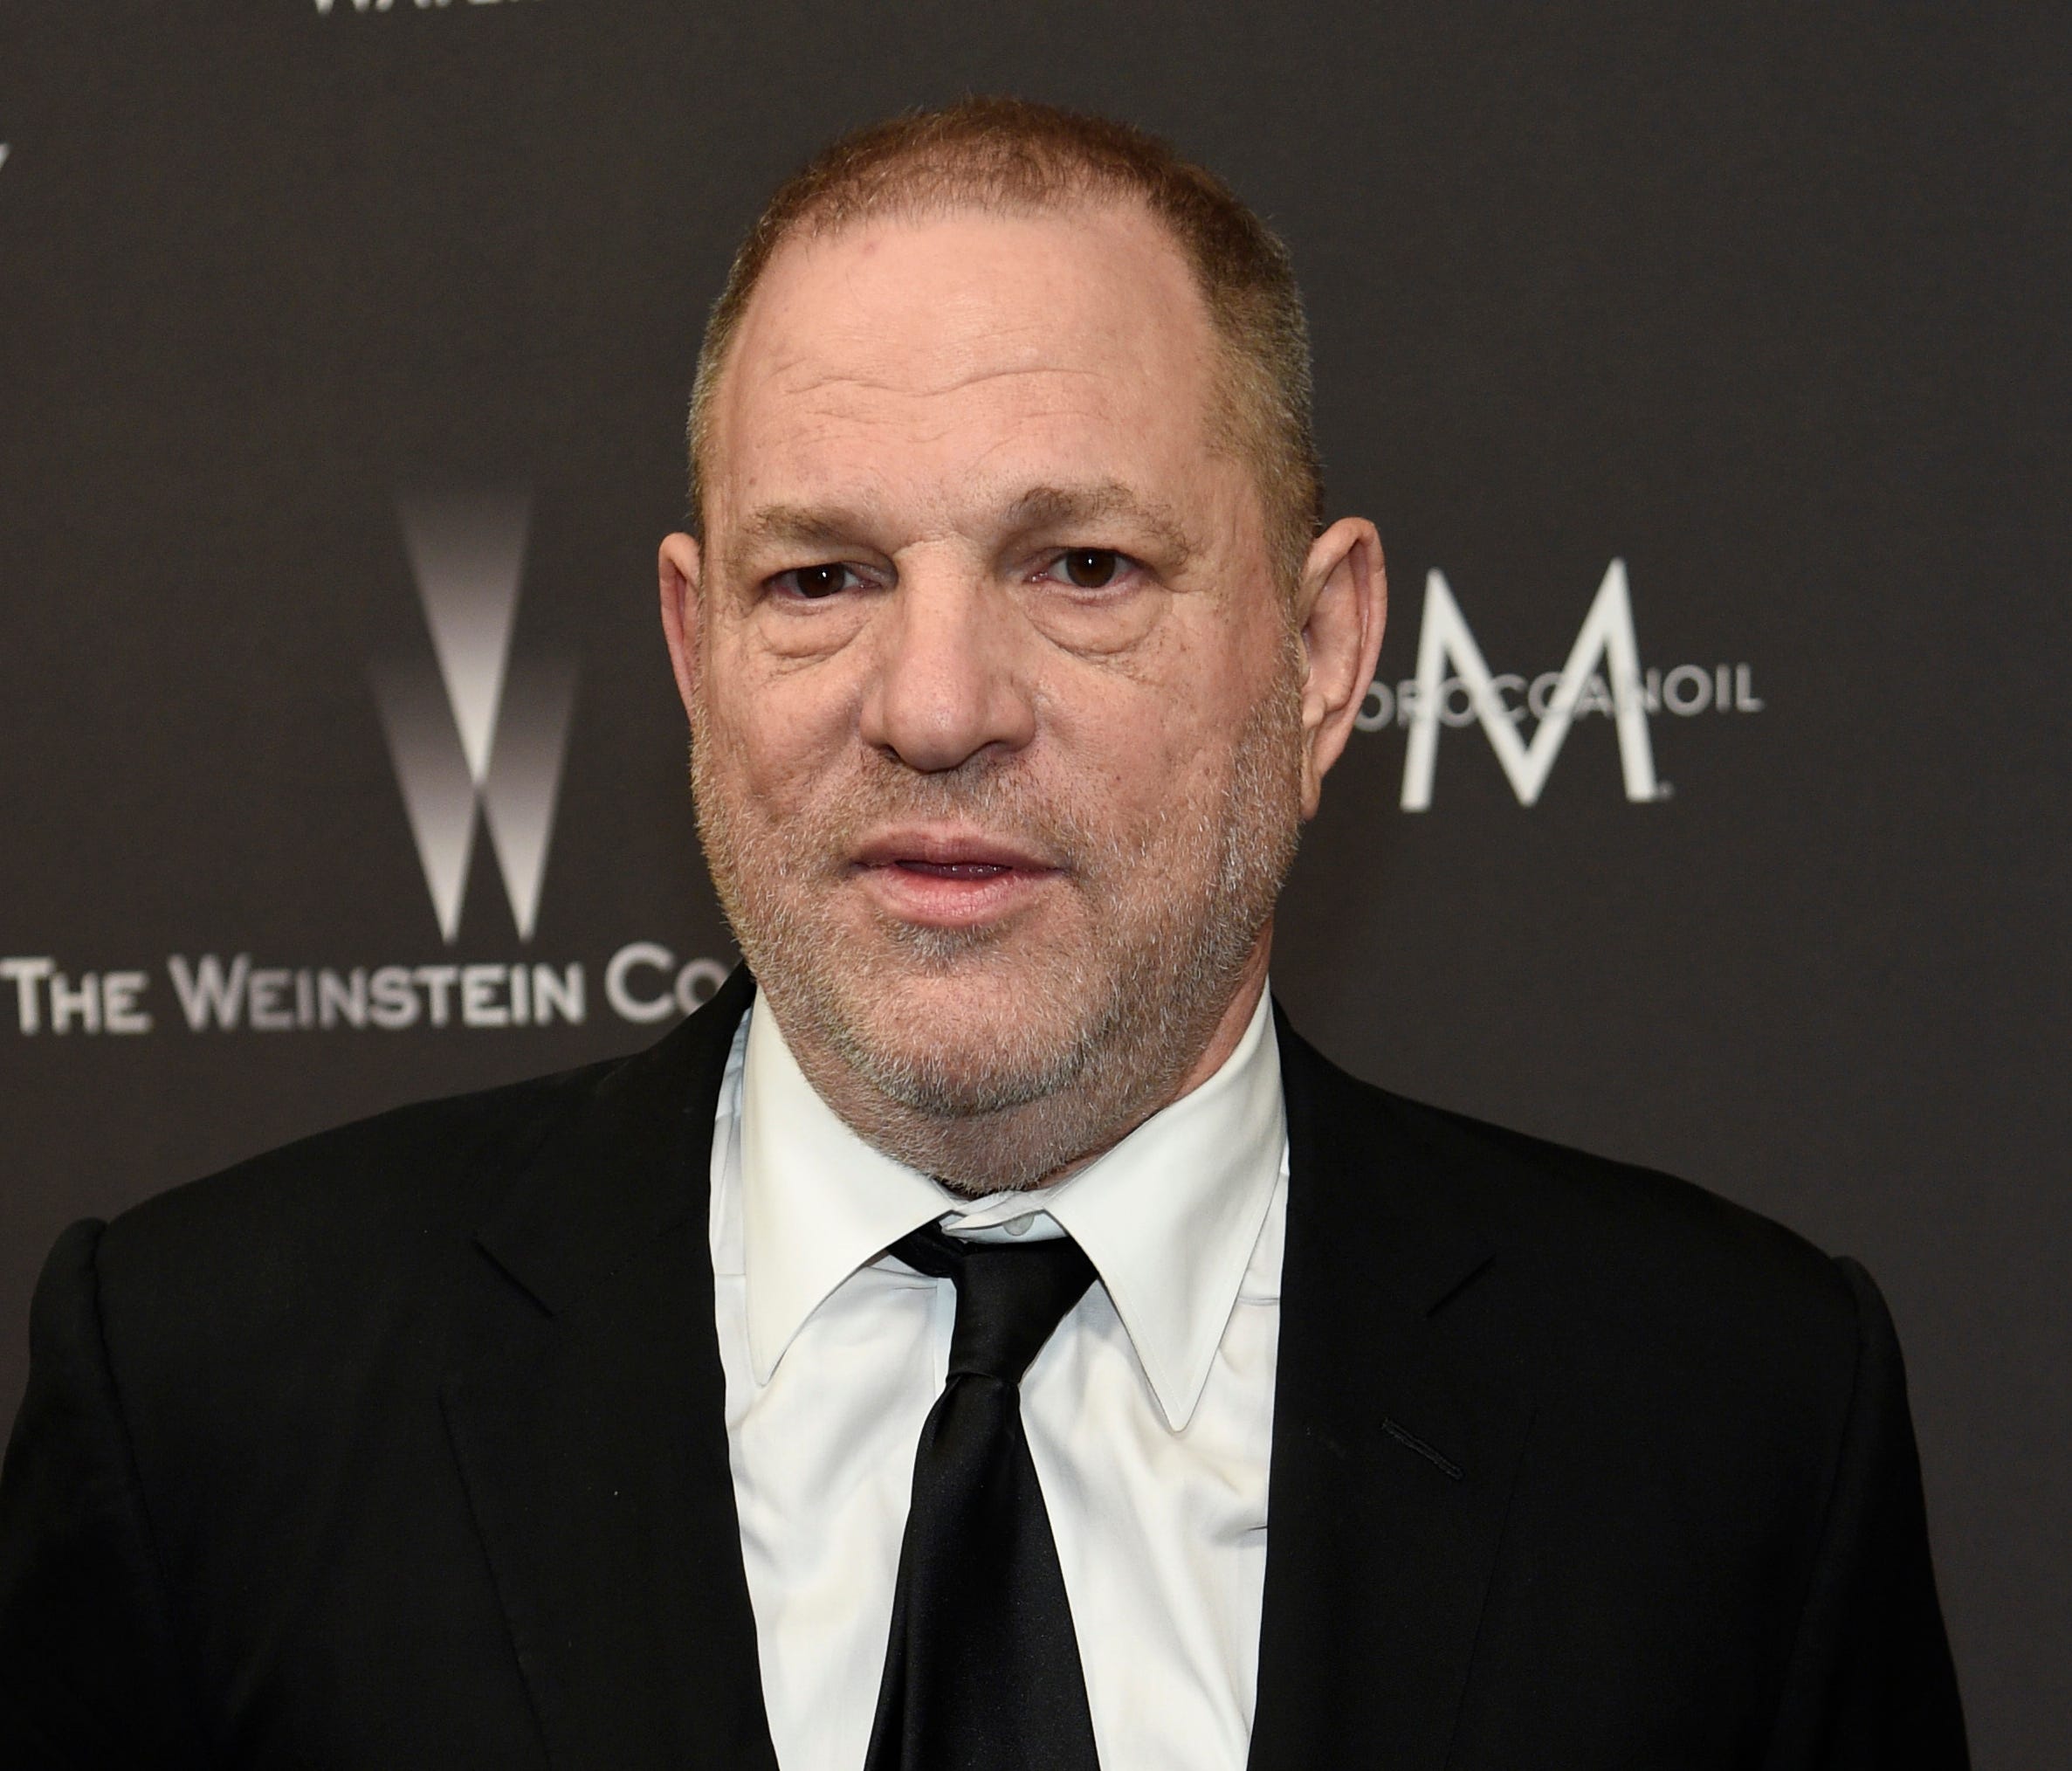 Ramifications continue to unfold for Harvey Weinstein, who stands accused by dozens of women of sexual assault and harassment.